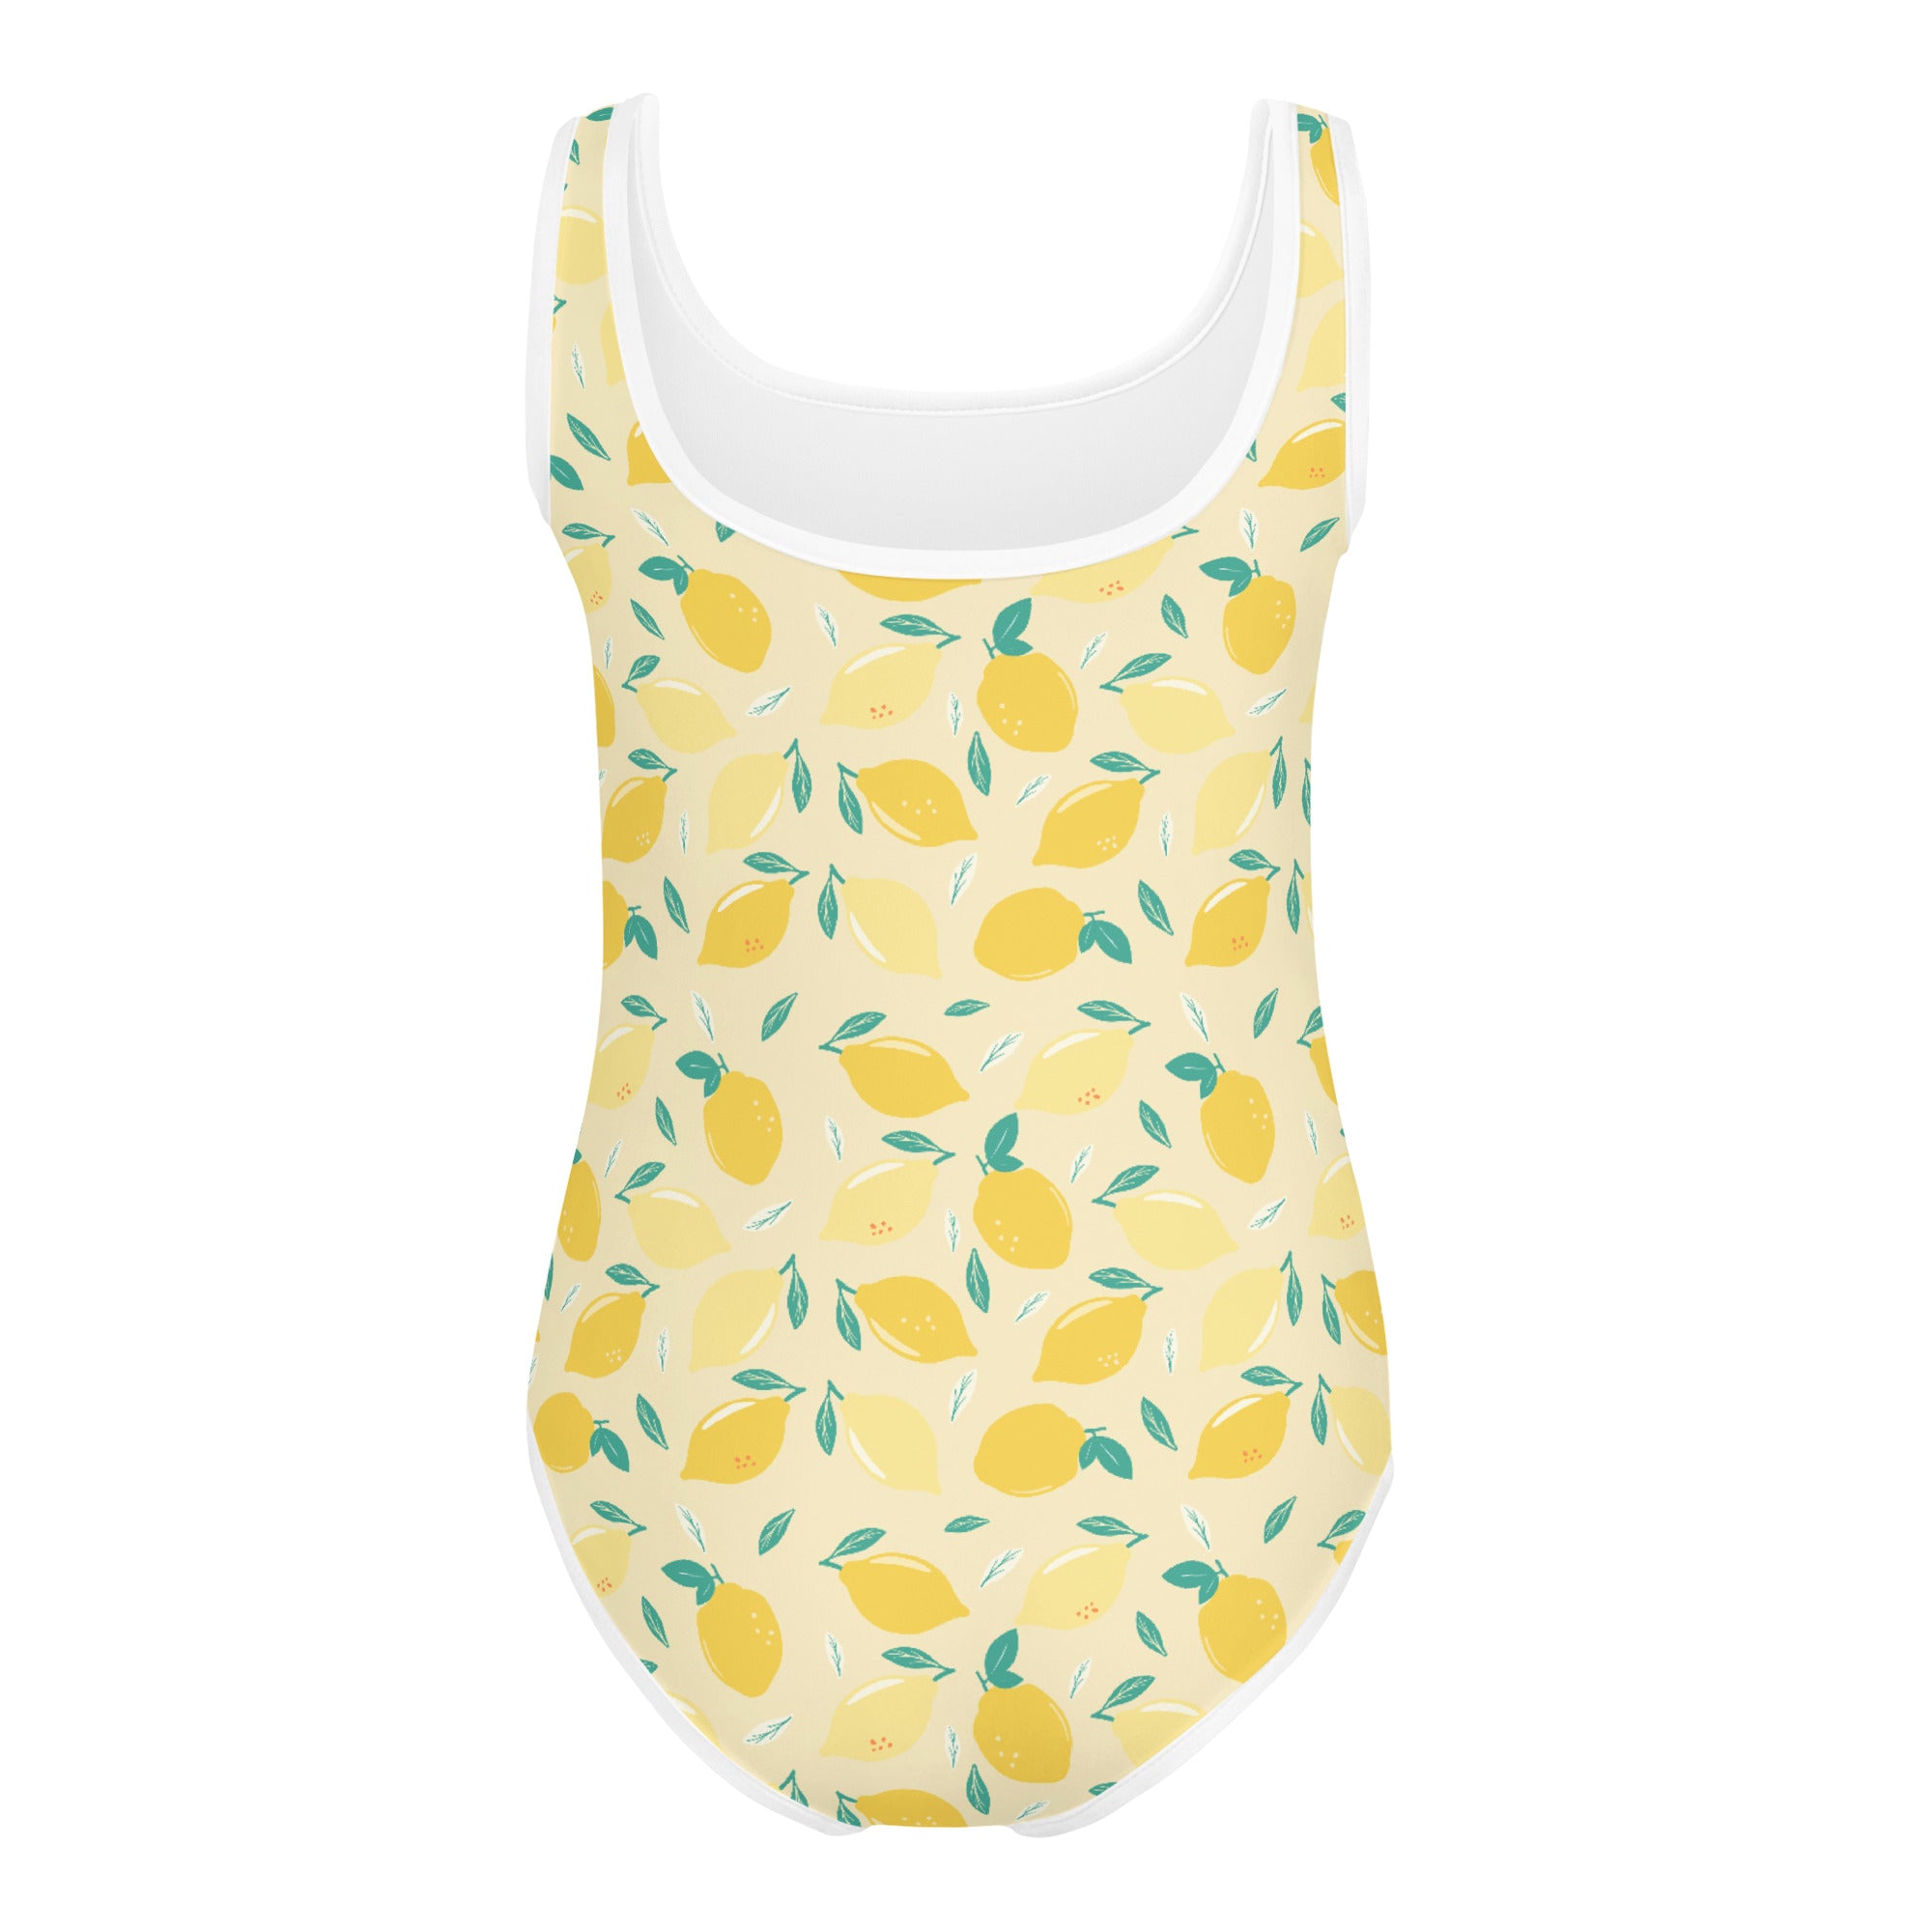 back side of the girls swimsuit with fun lemon design